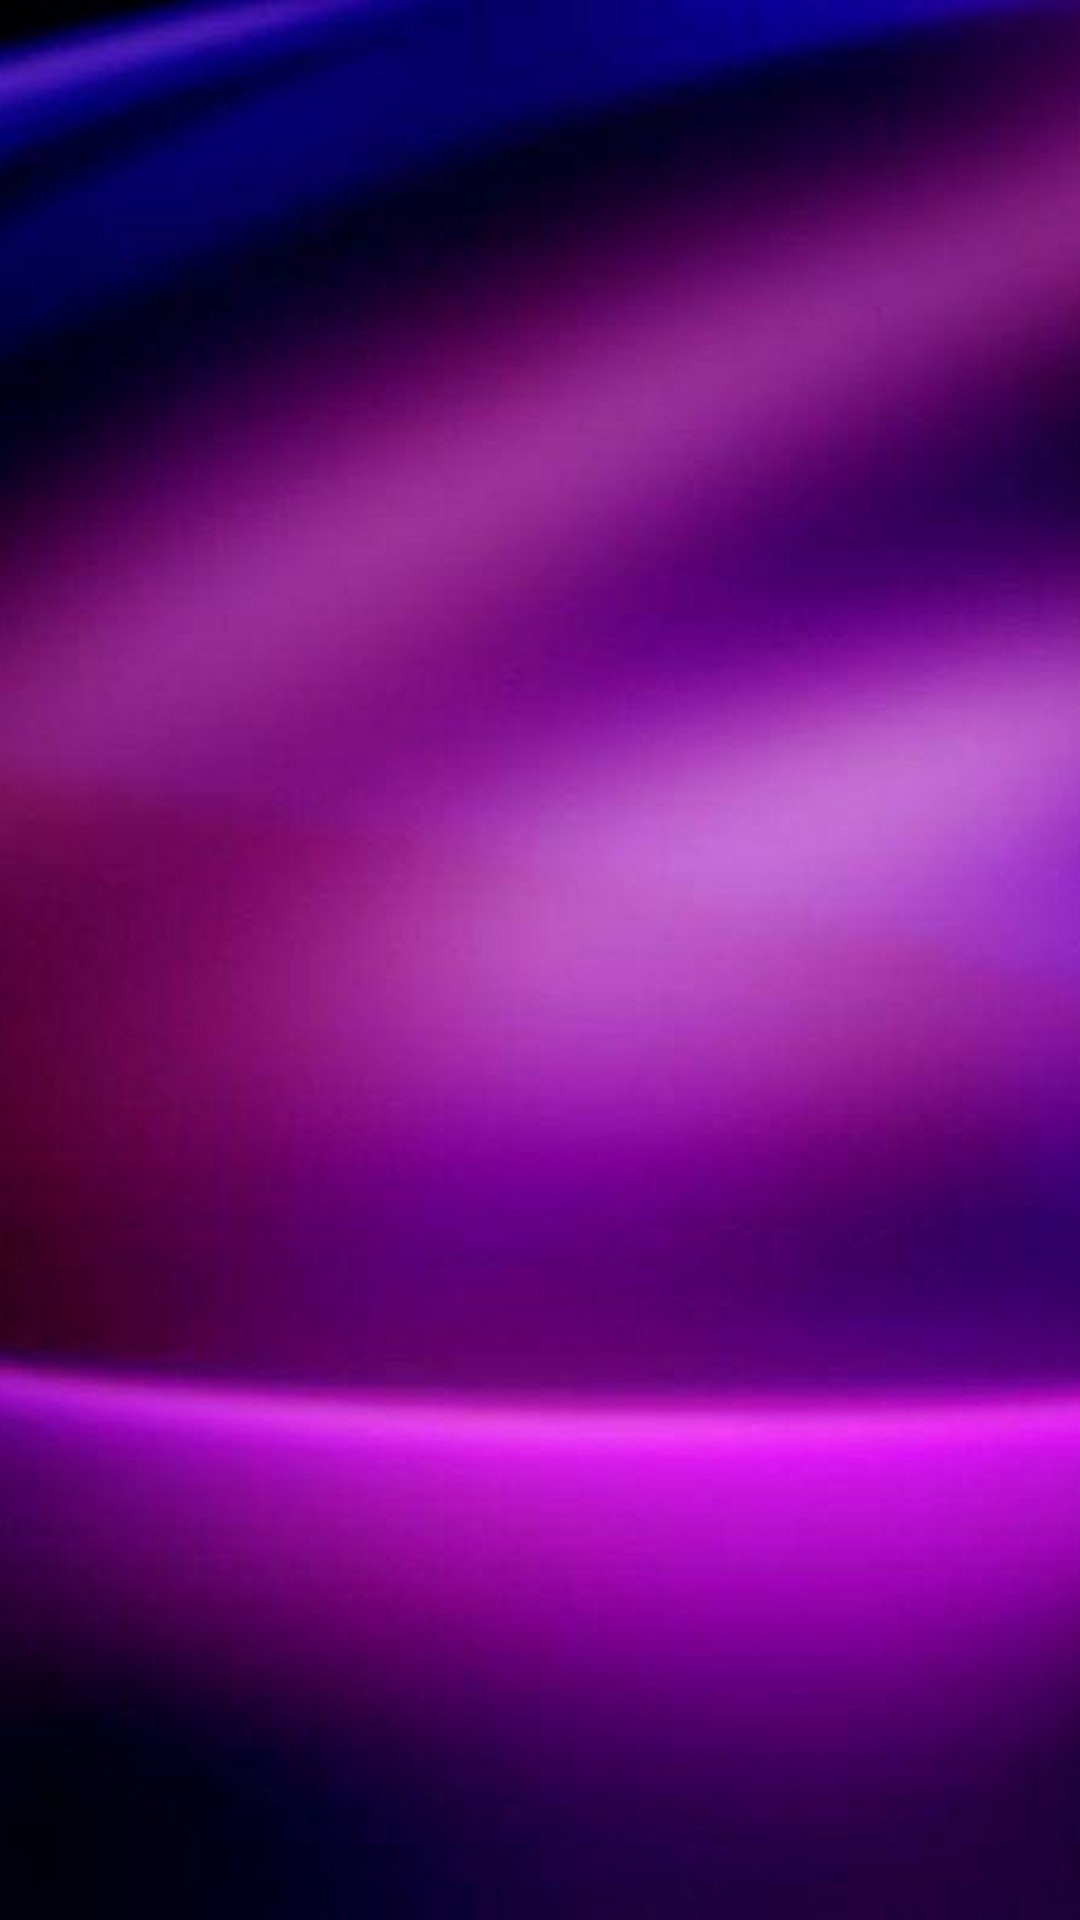 Android Wallpaper HD Neon Purple with high-resolution 1080x1920 pixel. You can use this wallpaper for your Android backgrounds, Tablet, Samsung Screensavers, Mobile Phone Lock Screen and another Smartphones device